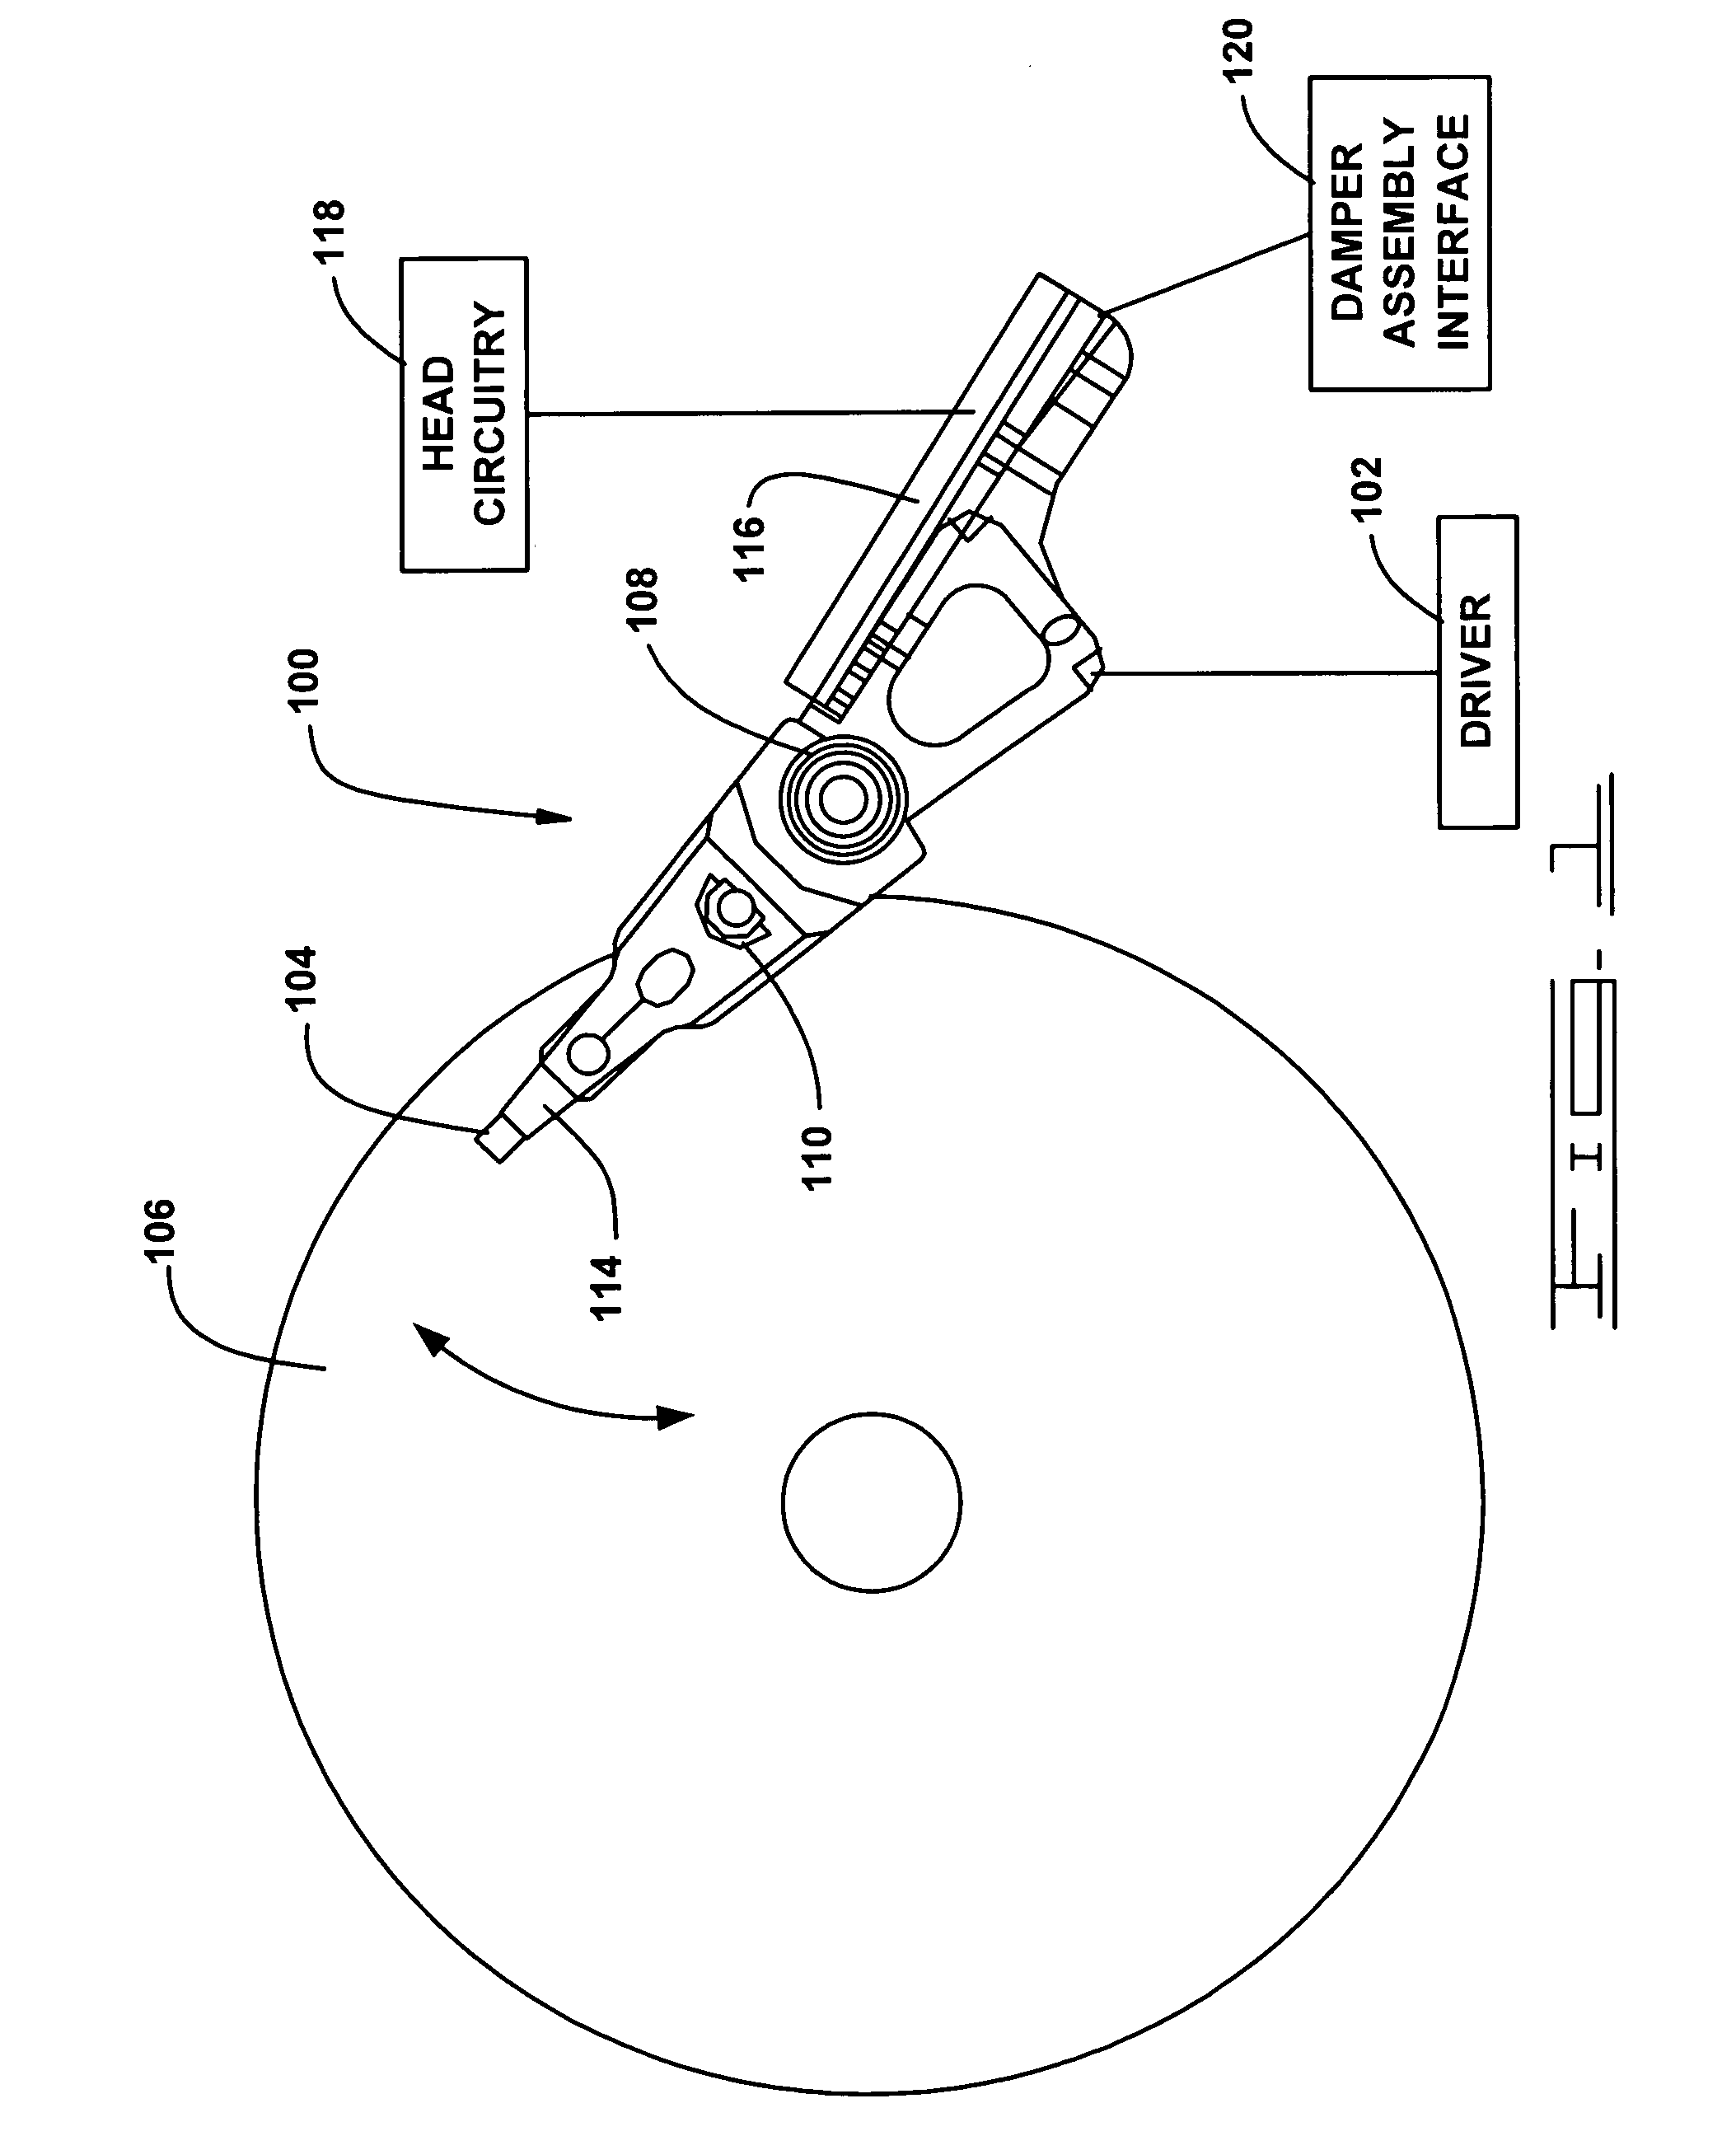 Actuator assembly including a circuit assembly and a damper therefor